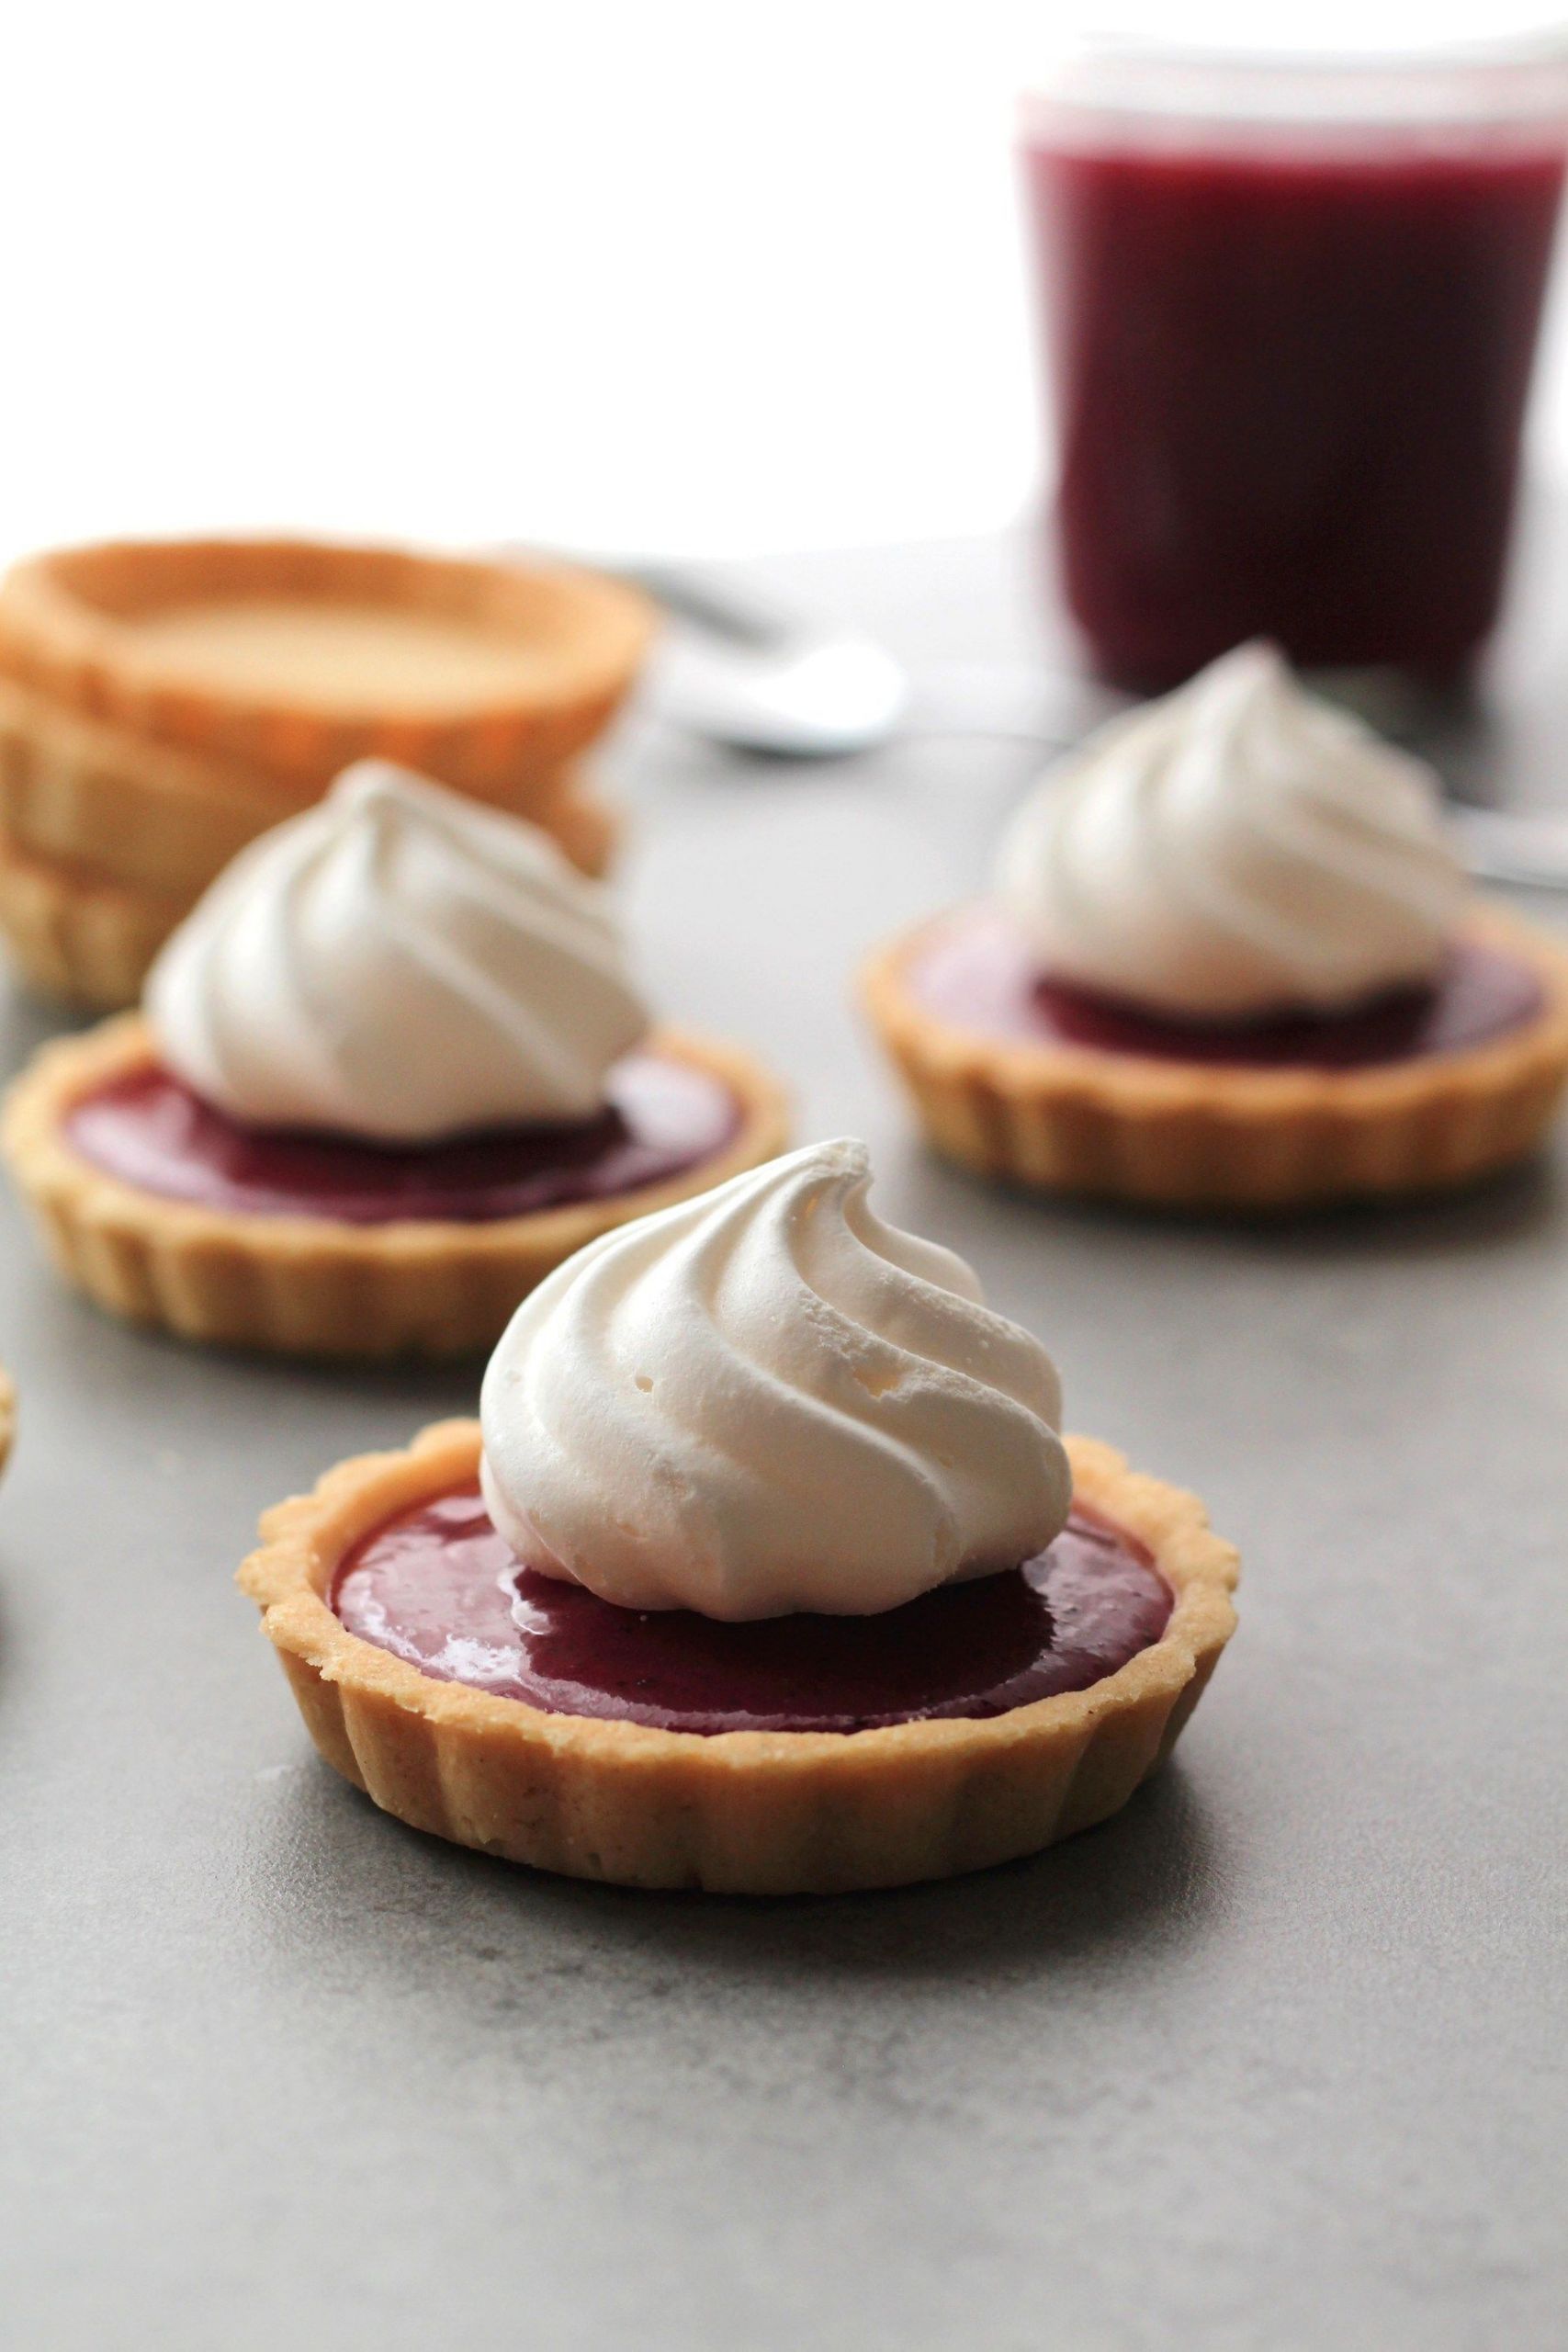 Dinner Party Desserts To Make Ahead
 These hibiscus tarts are the perfect dinner party dessert